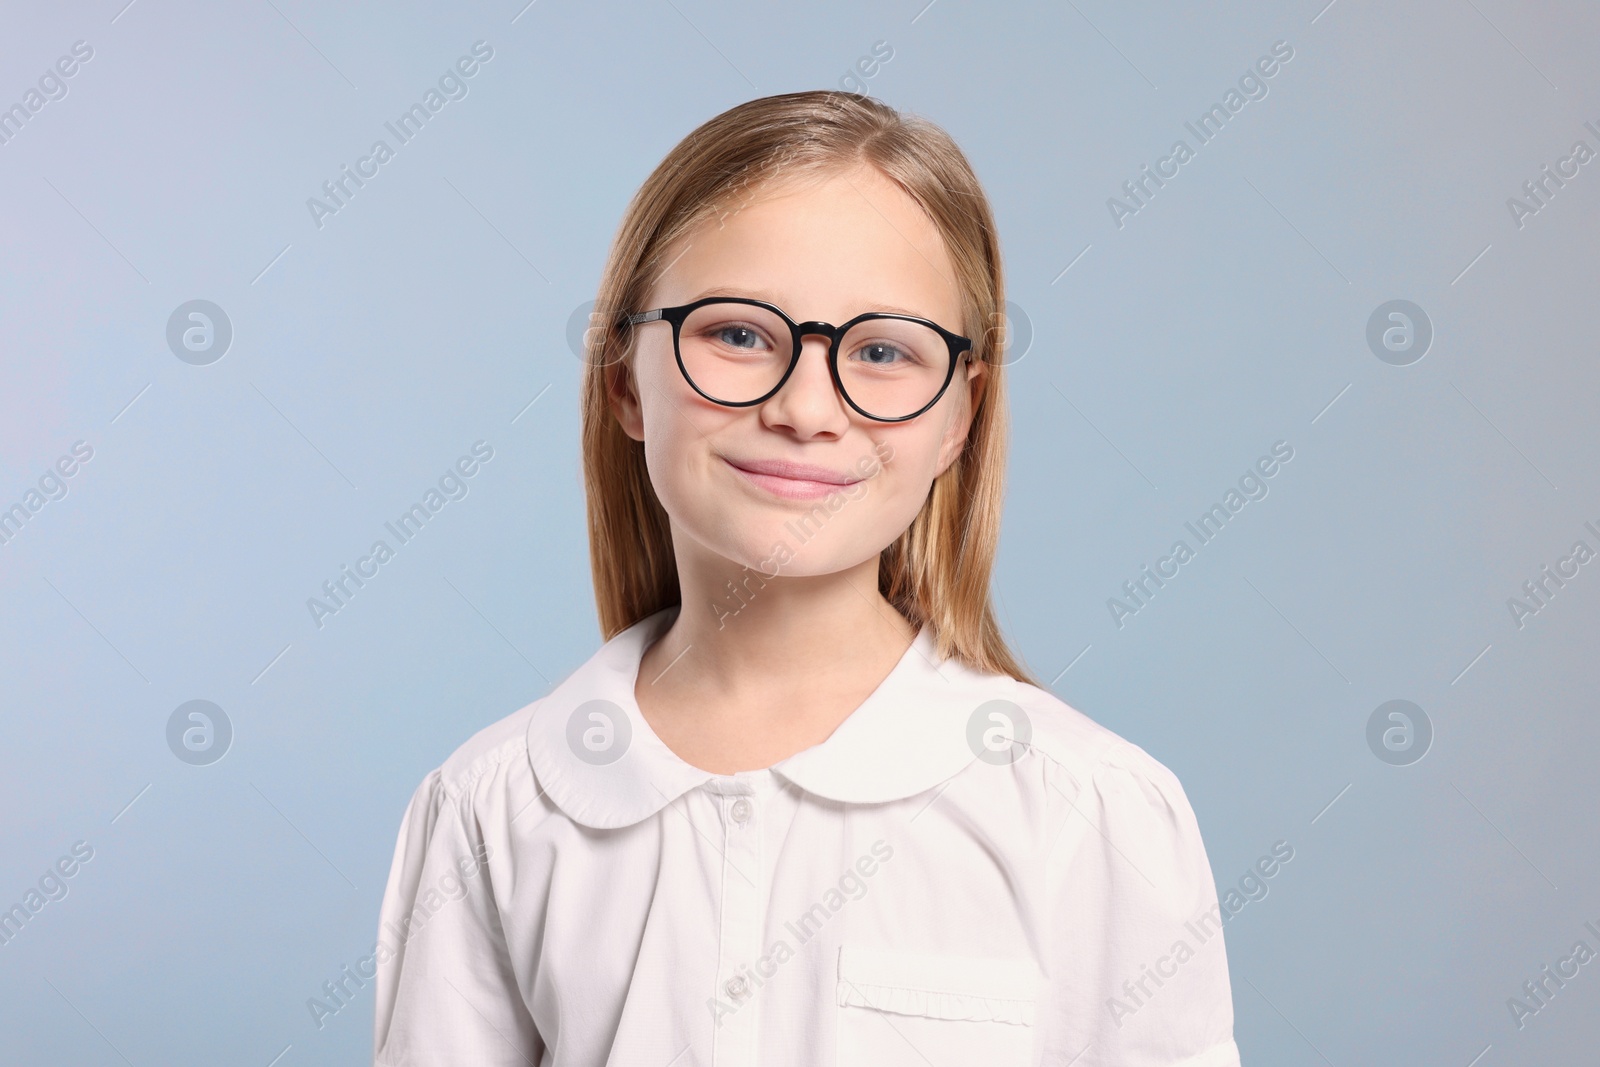 Photo of Portrait of cute girl in glasses on light grey background